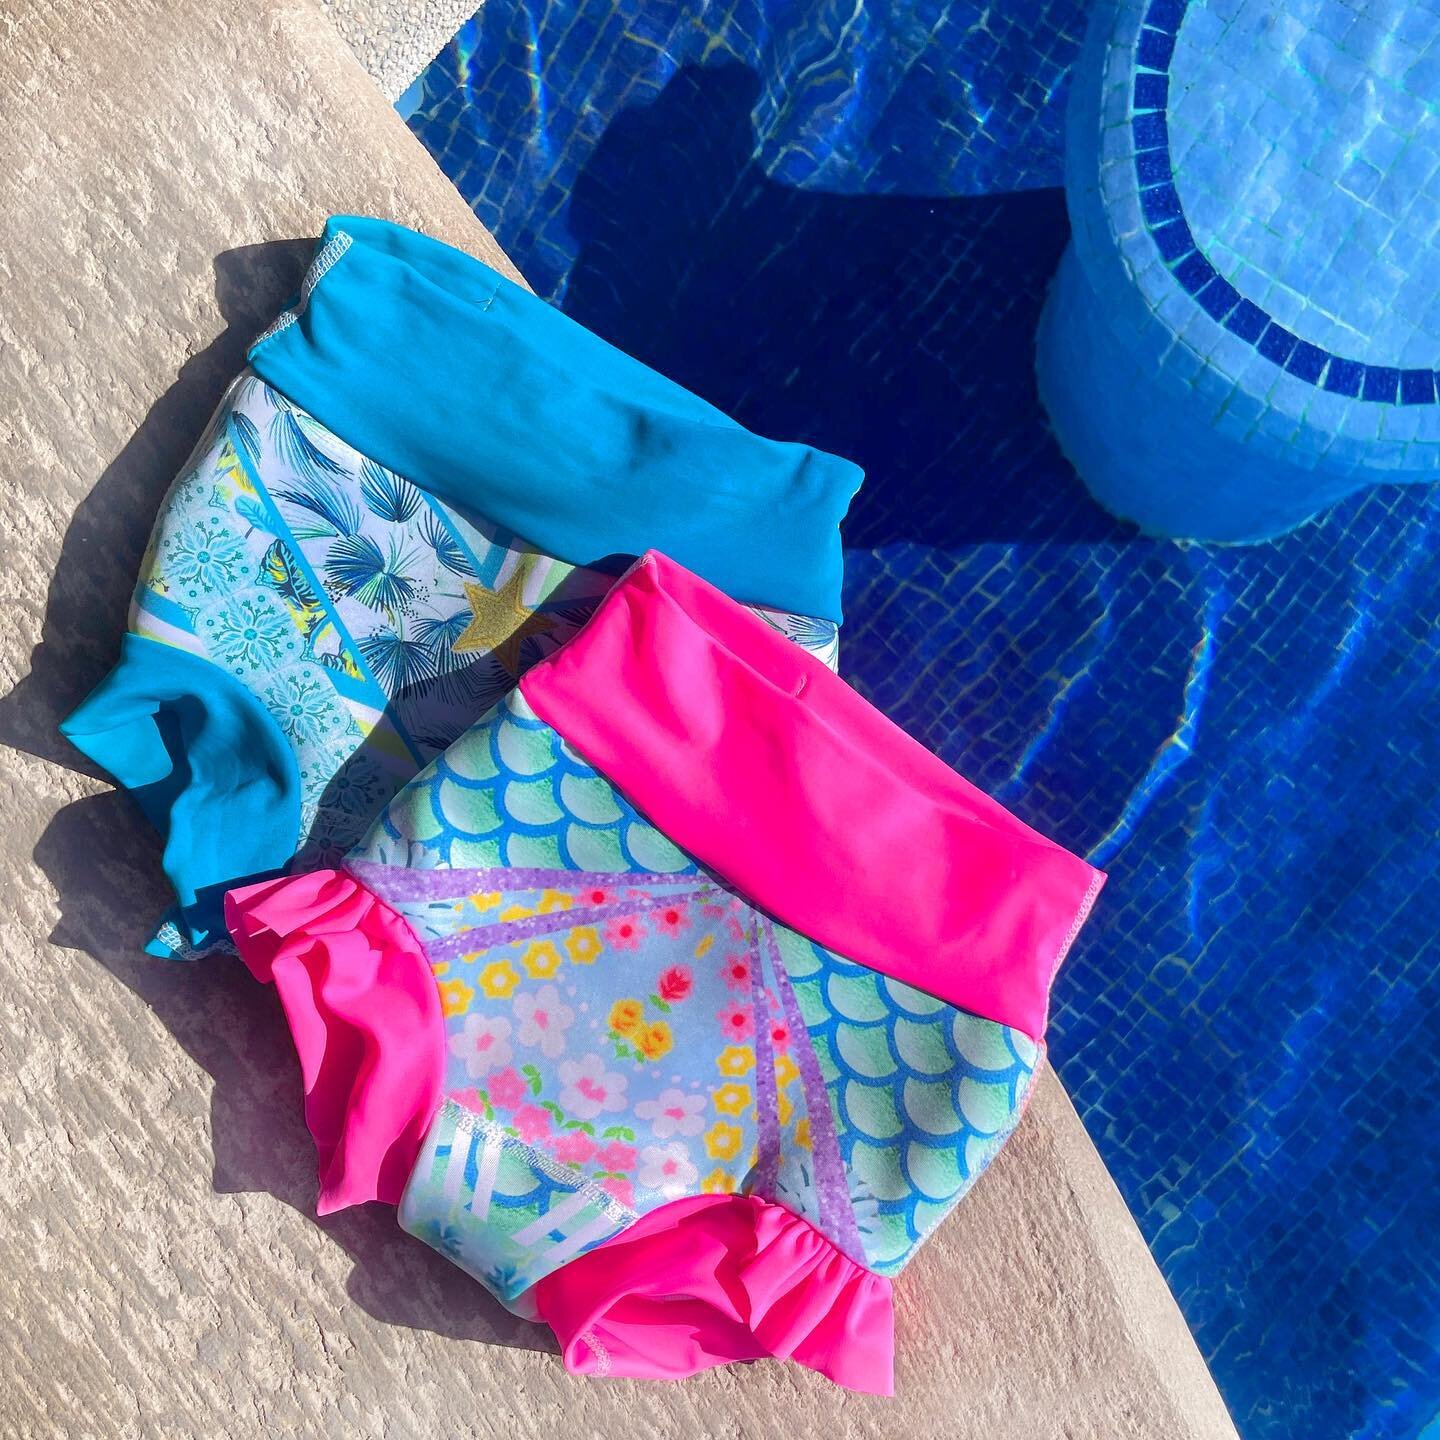 I had the hardest time finding a fun &amp; functional reusable swim diaper for my little one, so I decided to create them instead! 

A few question for all the moms with water loving babes:

Would you pair these with a rashguard or bikini top? 

What